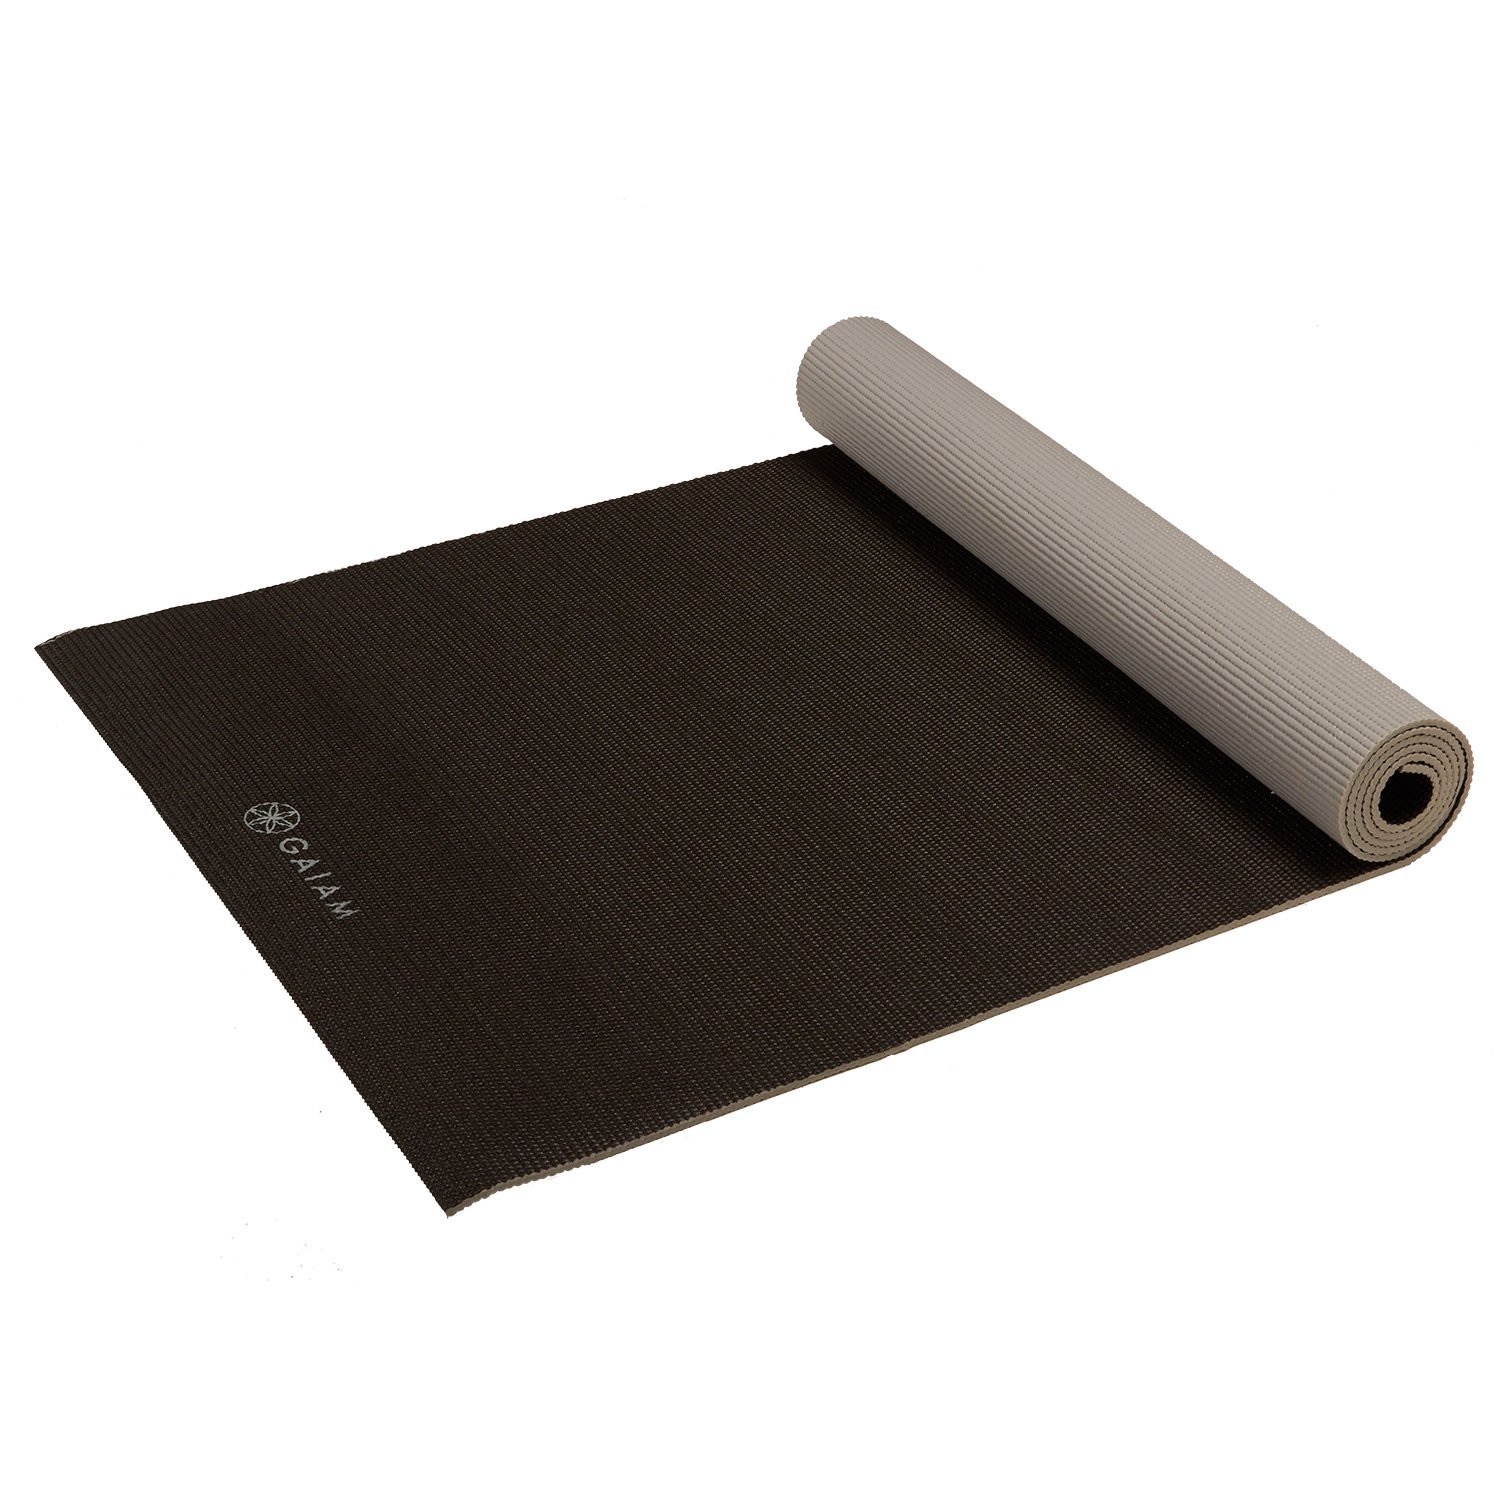 68" x 24" Gaiam Solid Color Non Slip Exercise & Yoga Mat (4mm Thick, Granite Storm) $11 + Free Shipping w/ Prime or on Orders $25+